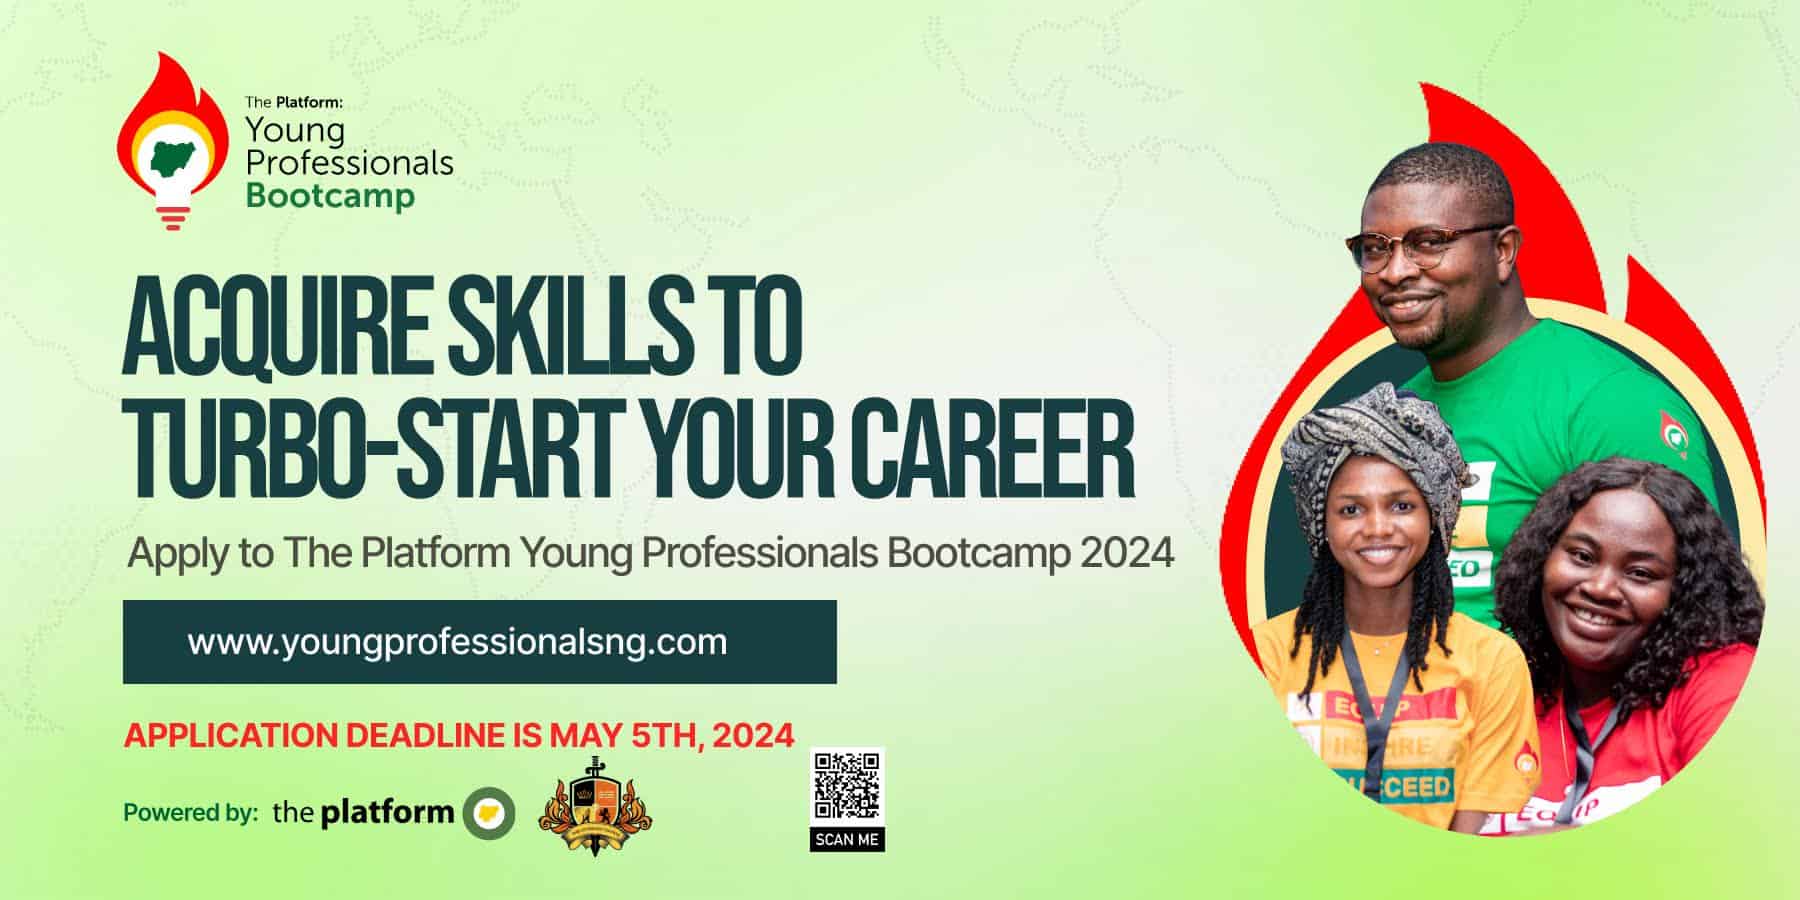 The Platform Young Professionals Bootcamp (YPB)